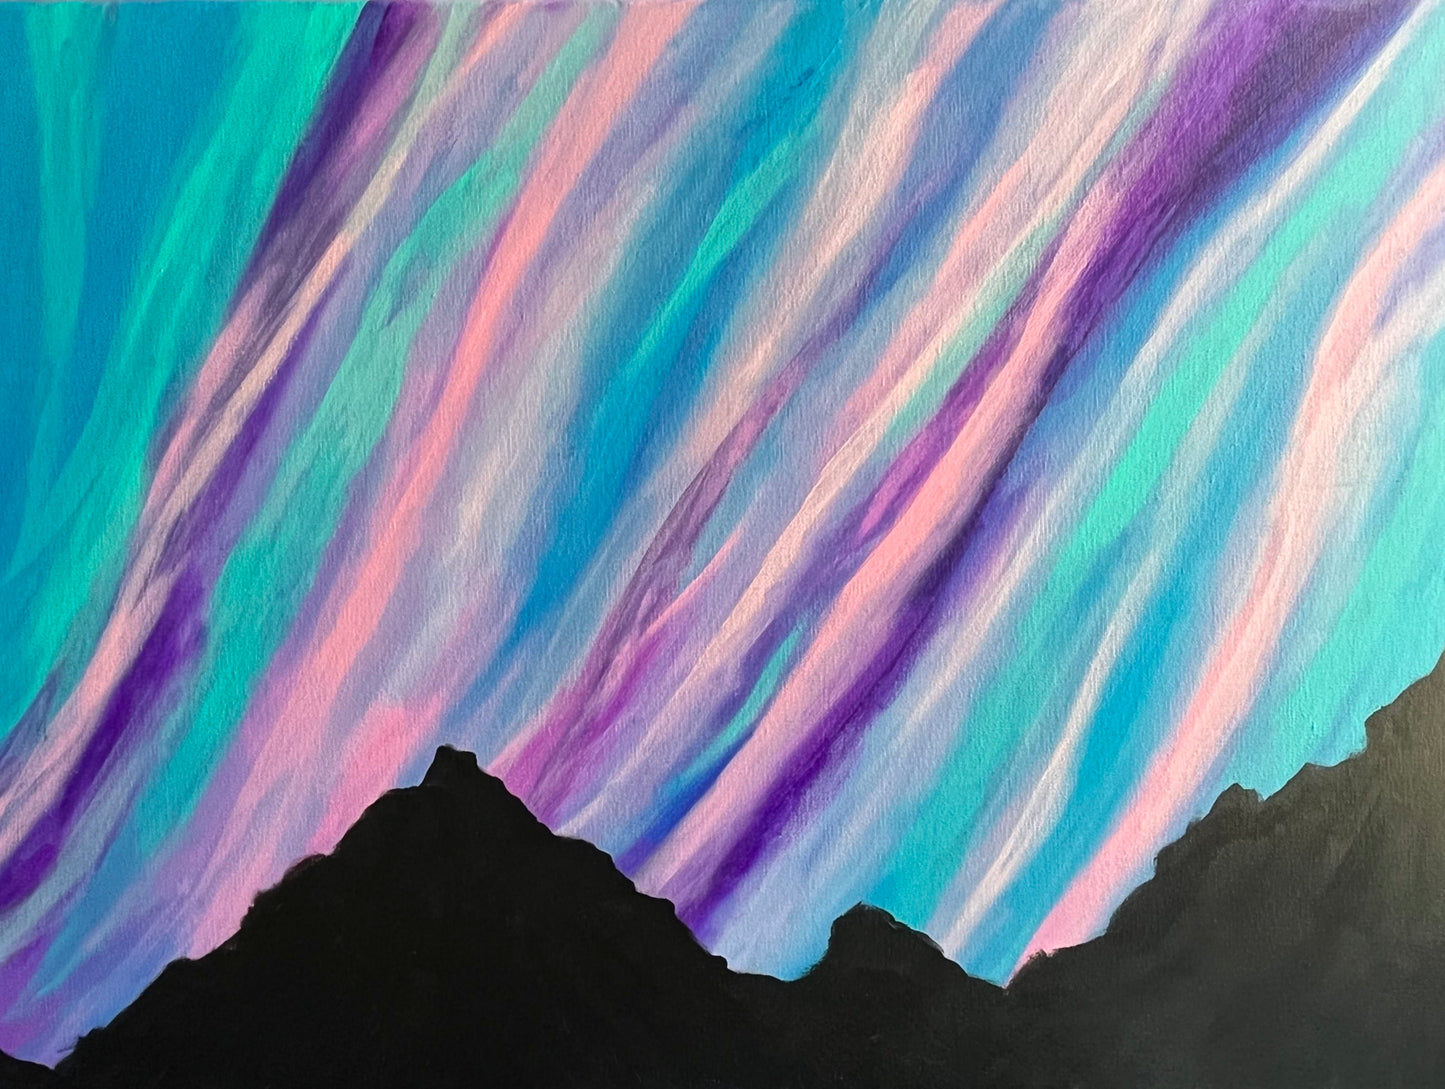 Original acrylic painting of mountains silhouettes against a colorful Aurora skies